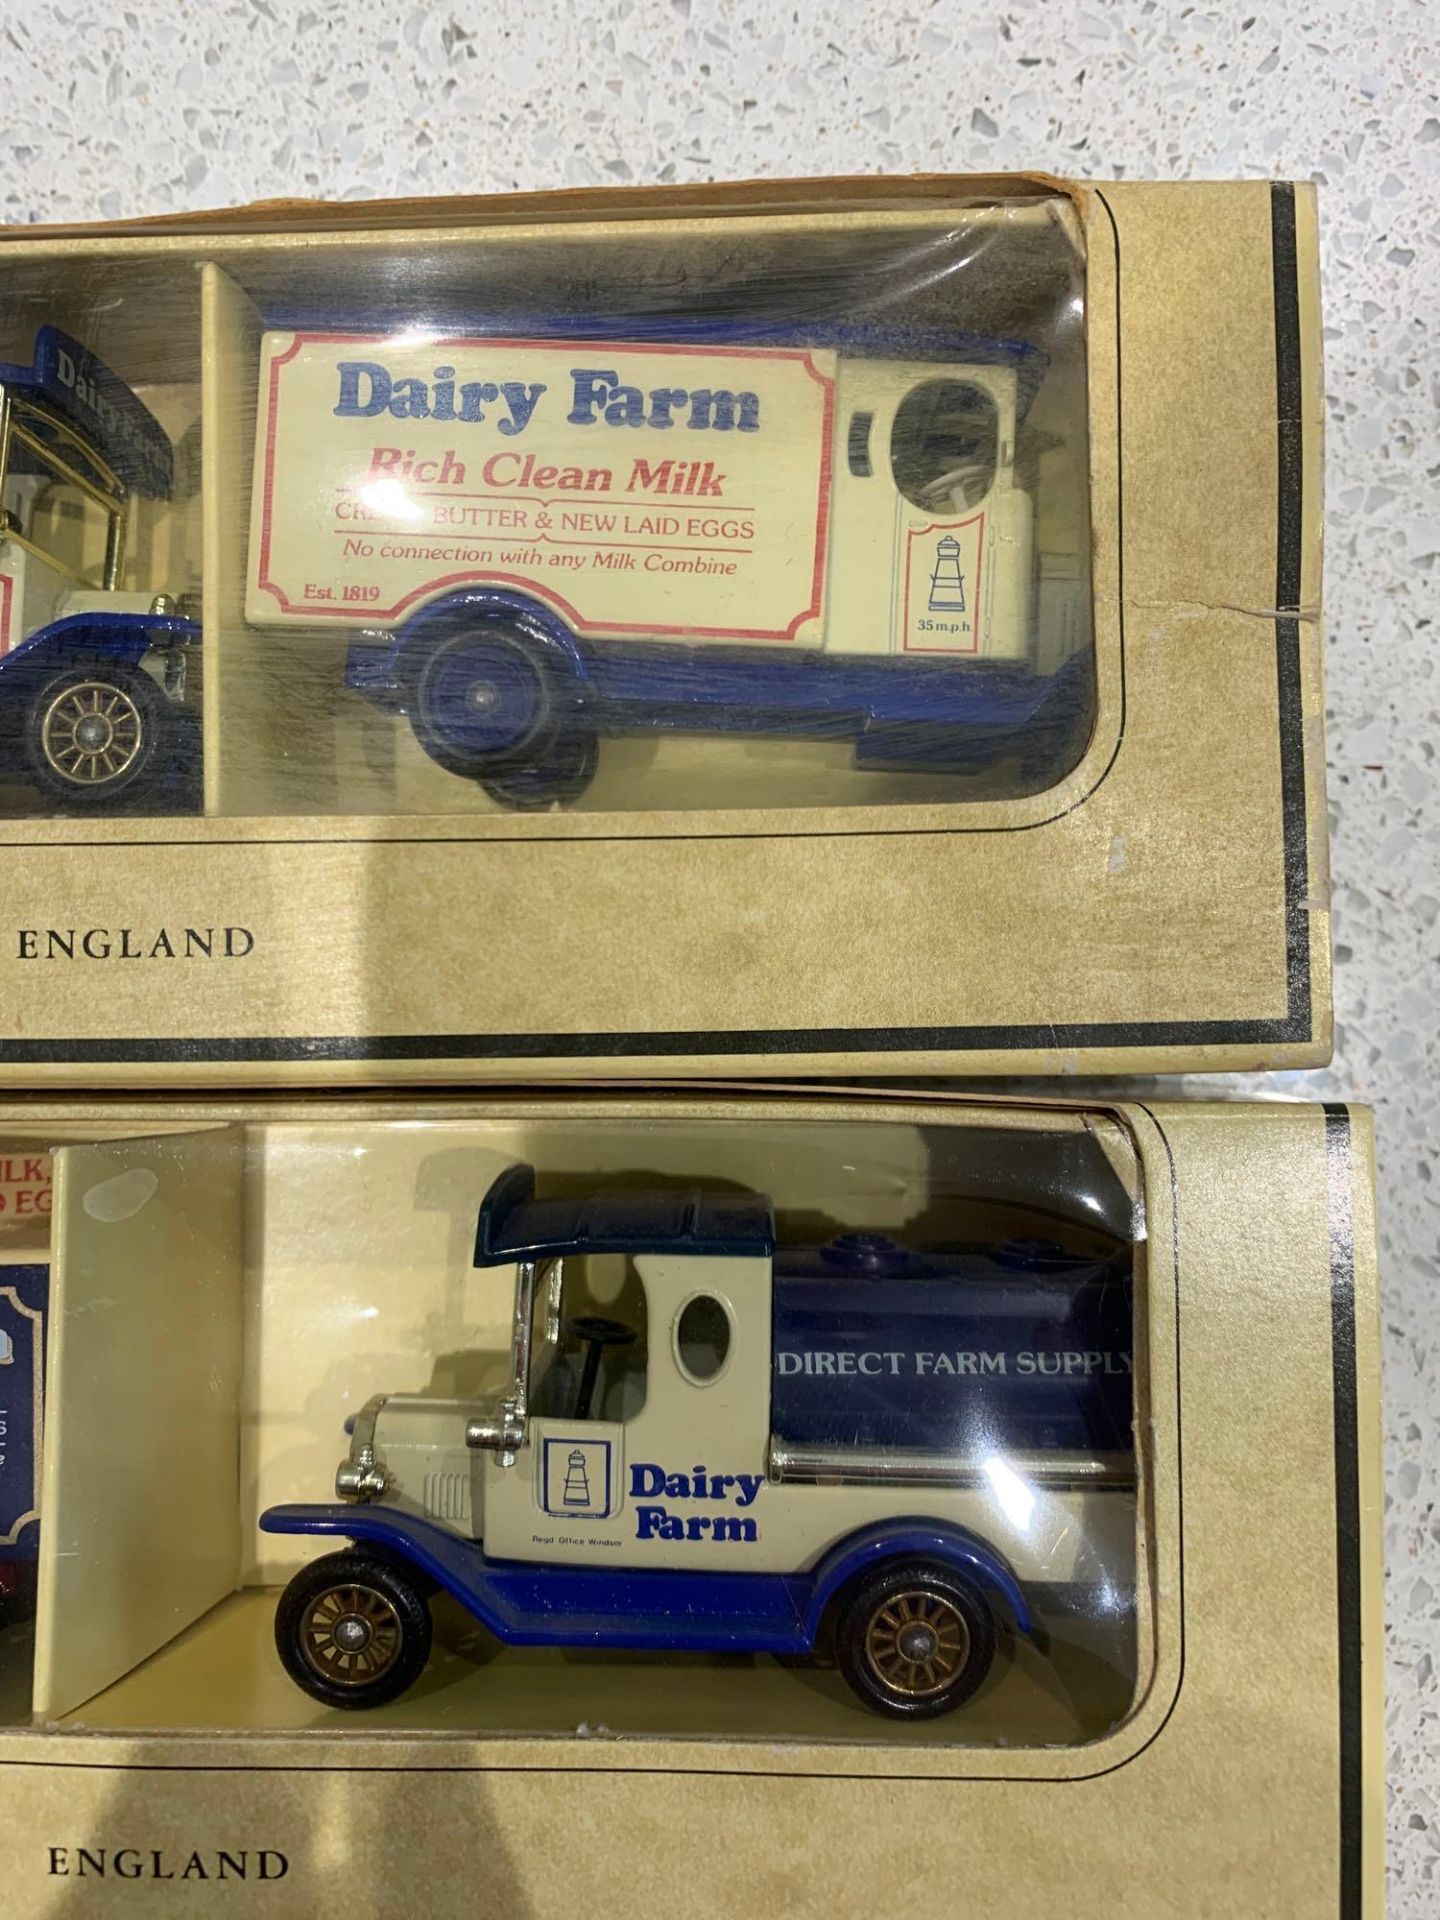 2 x Lledo 3 car sets 2 x Lledo 3 car sets Both Are Dairy Farm Promtional sets - Image 4 of 5